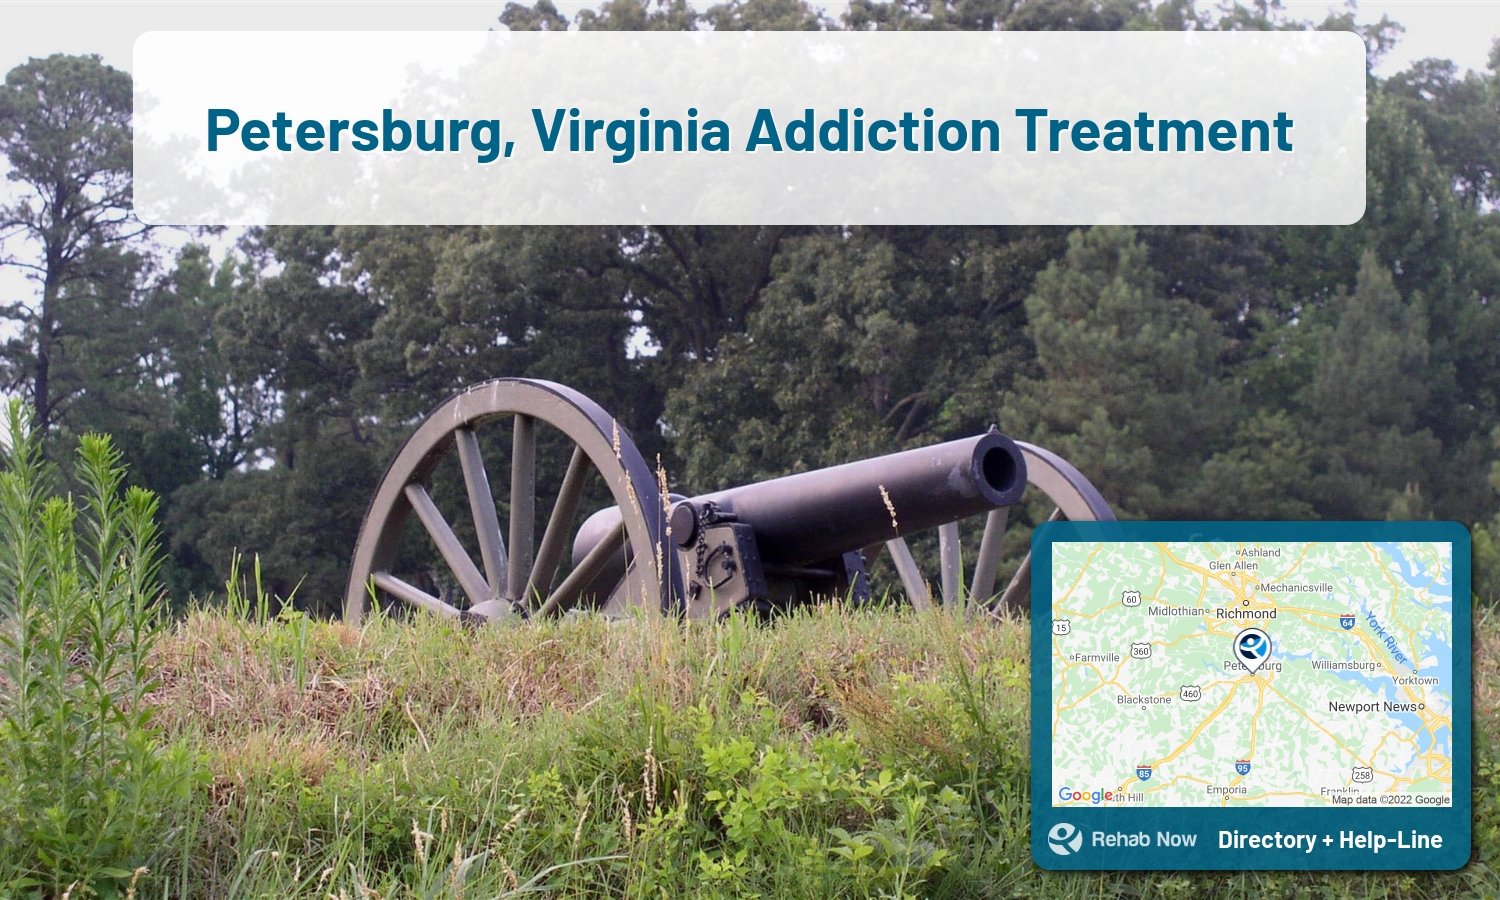 Drug rehab and alcohol treatment services near you in Petersburg, Virginia. Need help choosing a center? Call us, free.